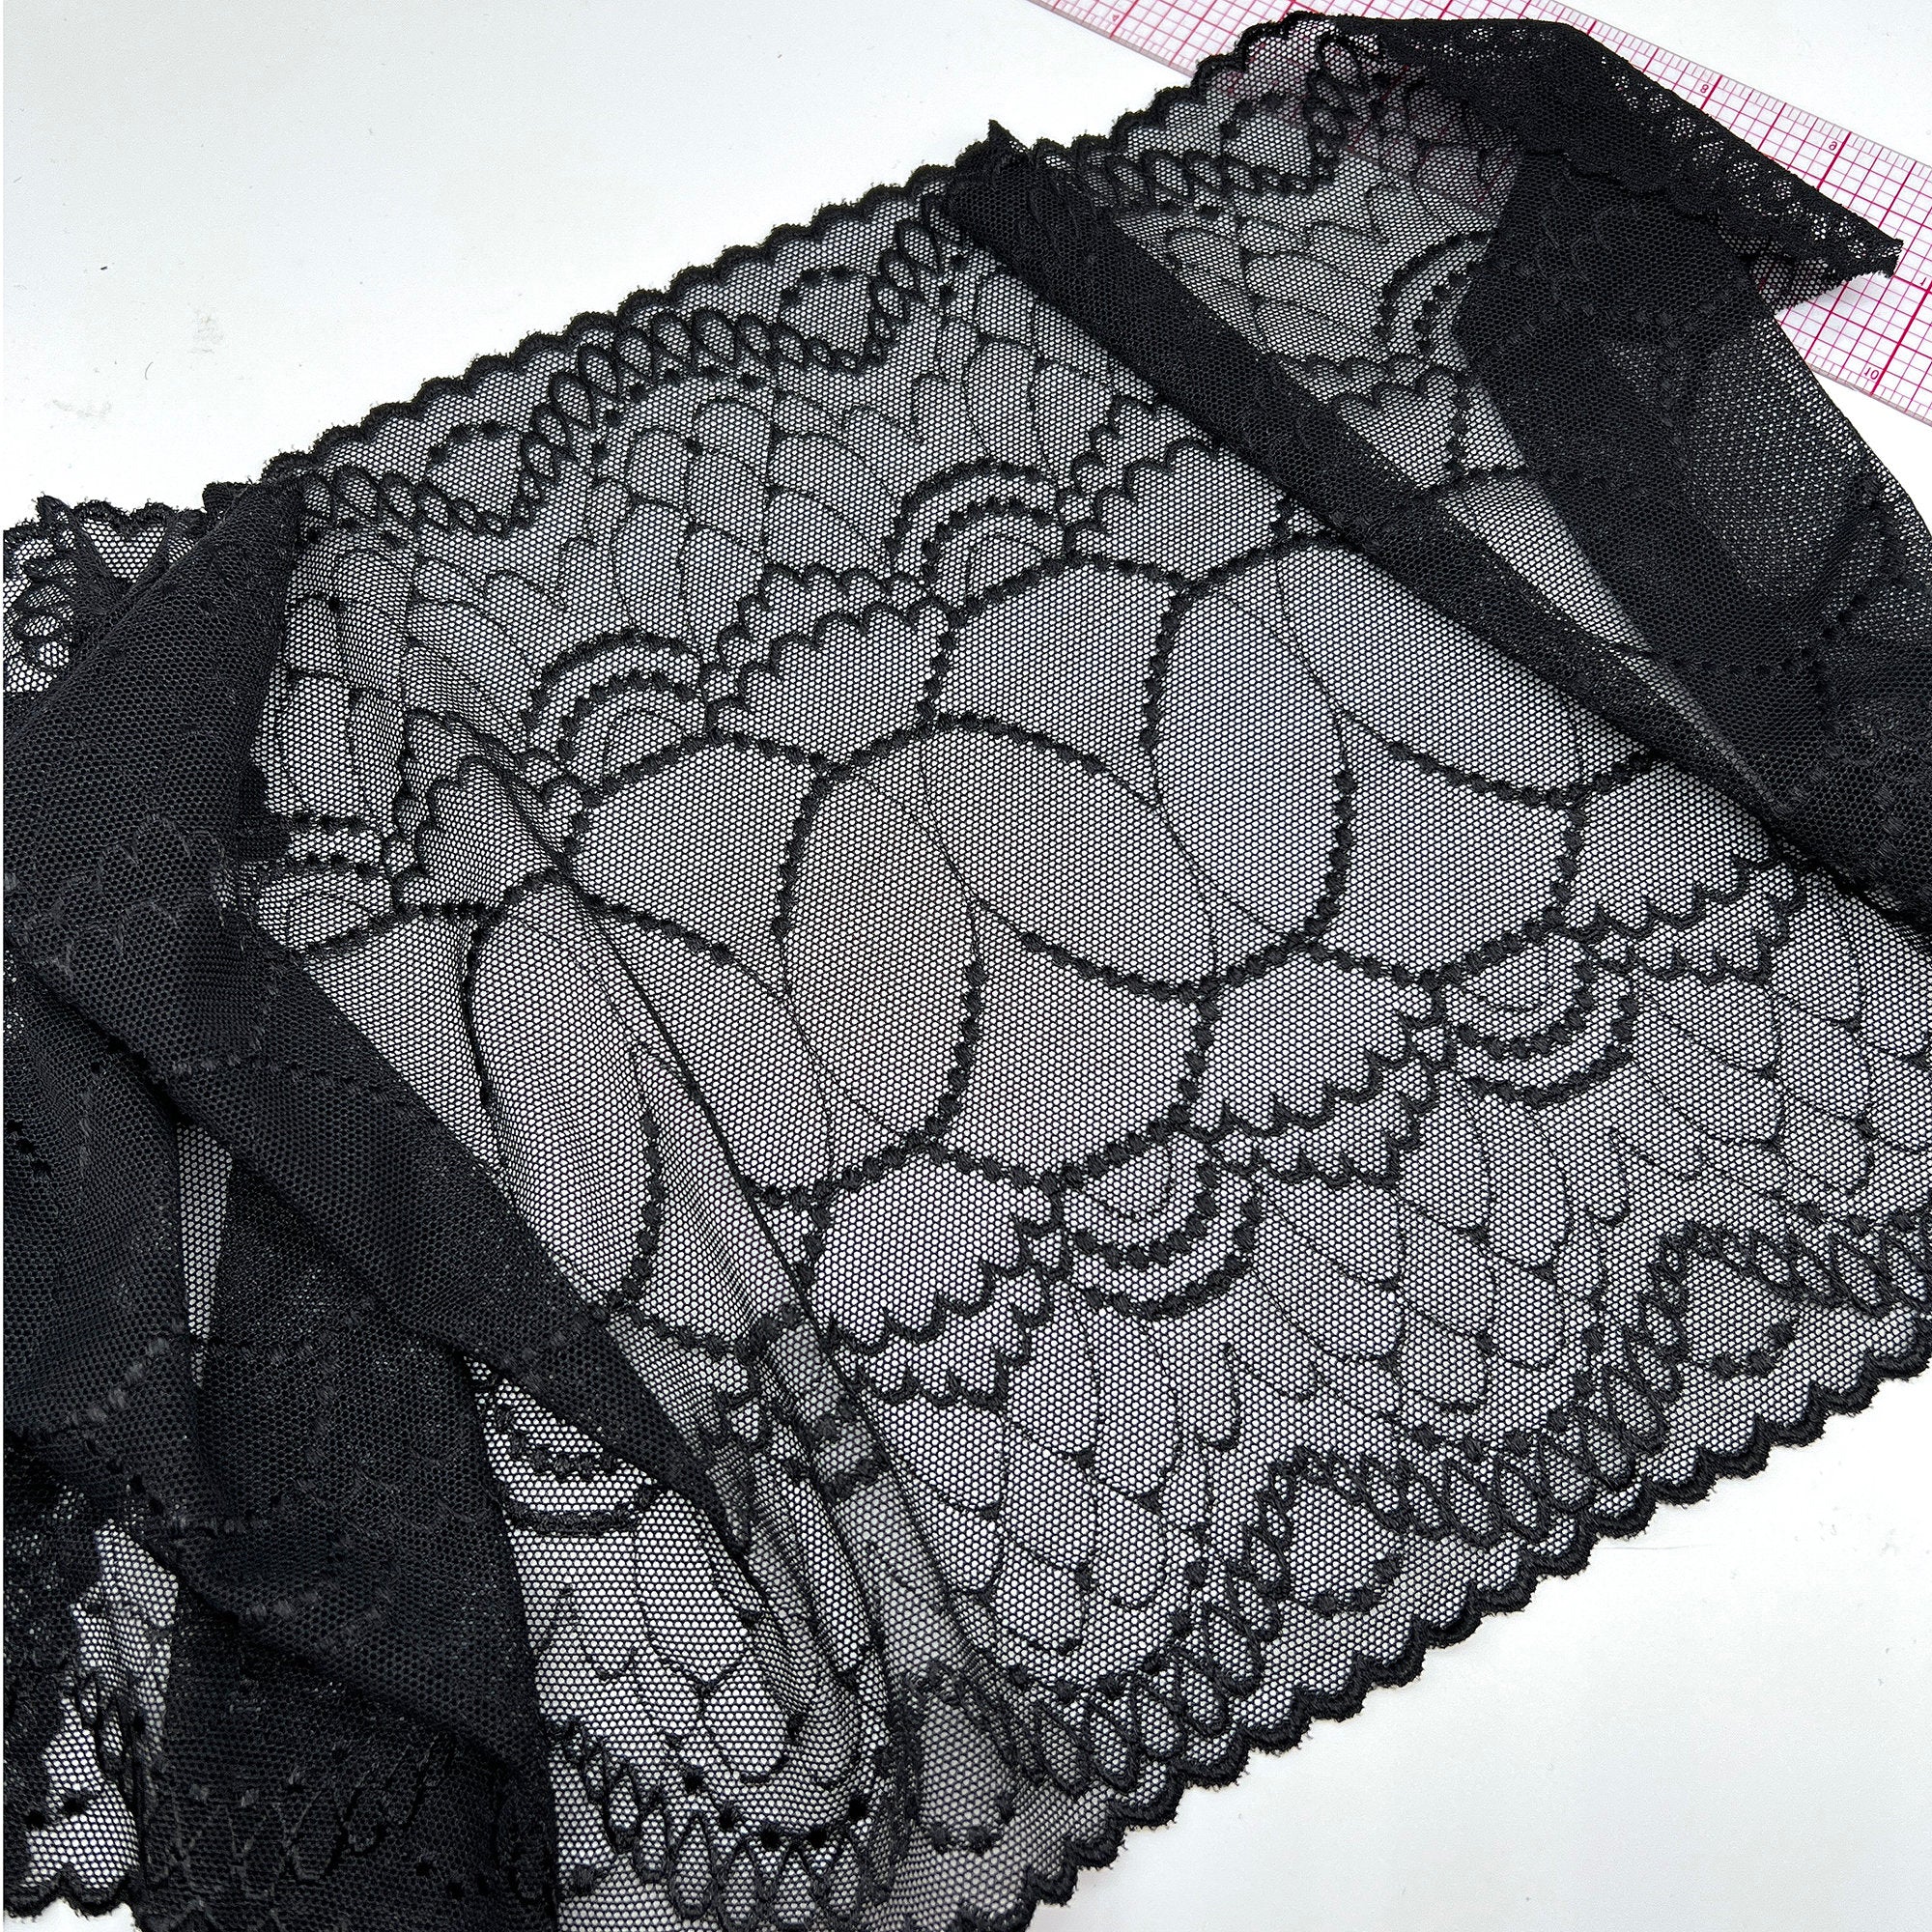 9.5" (24cm) Wide, Delicate Stretch Lace in Light Sand, Ivory, Black and White - 1 Yard - Stitch Love Studio